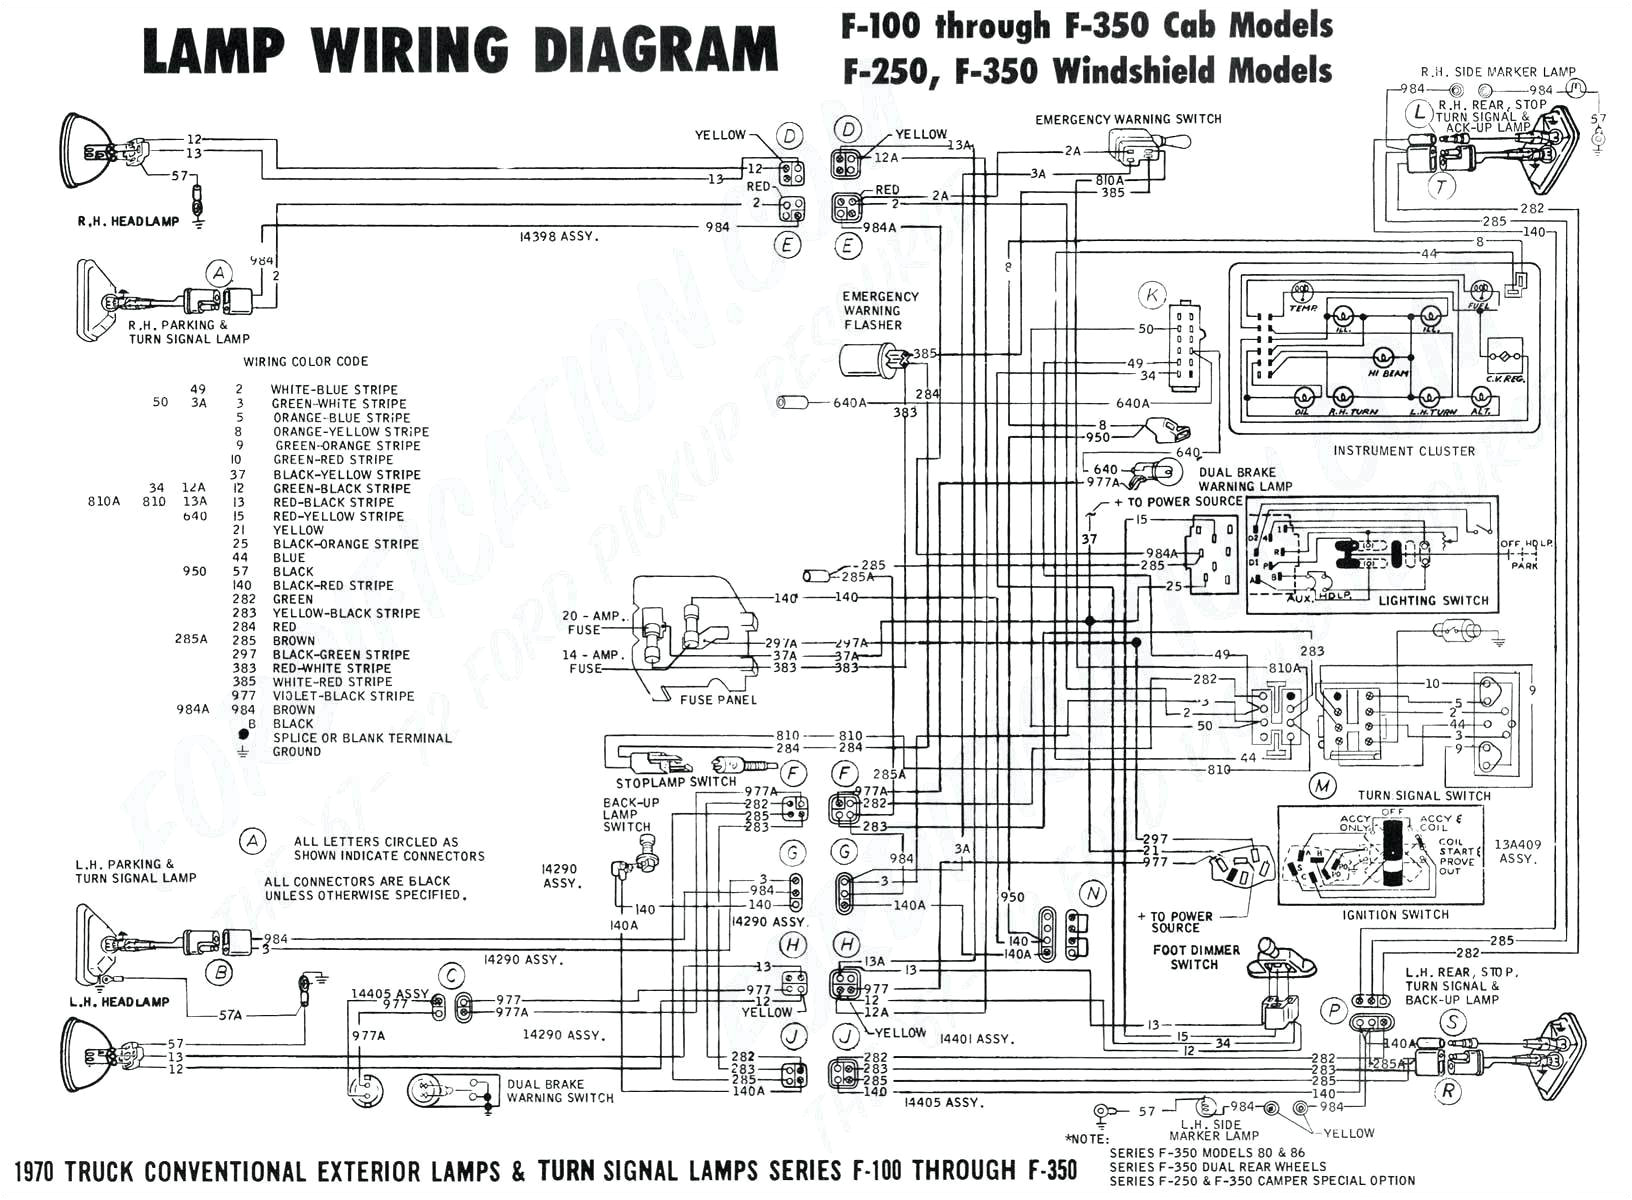 chevy s10 tail light wiring diagram as well 1999 wiring diagram local wiring diagram as well 2001 chevy s10 fuse diagram on wiring harness